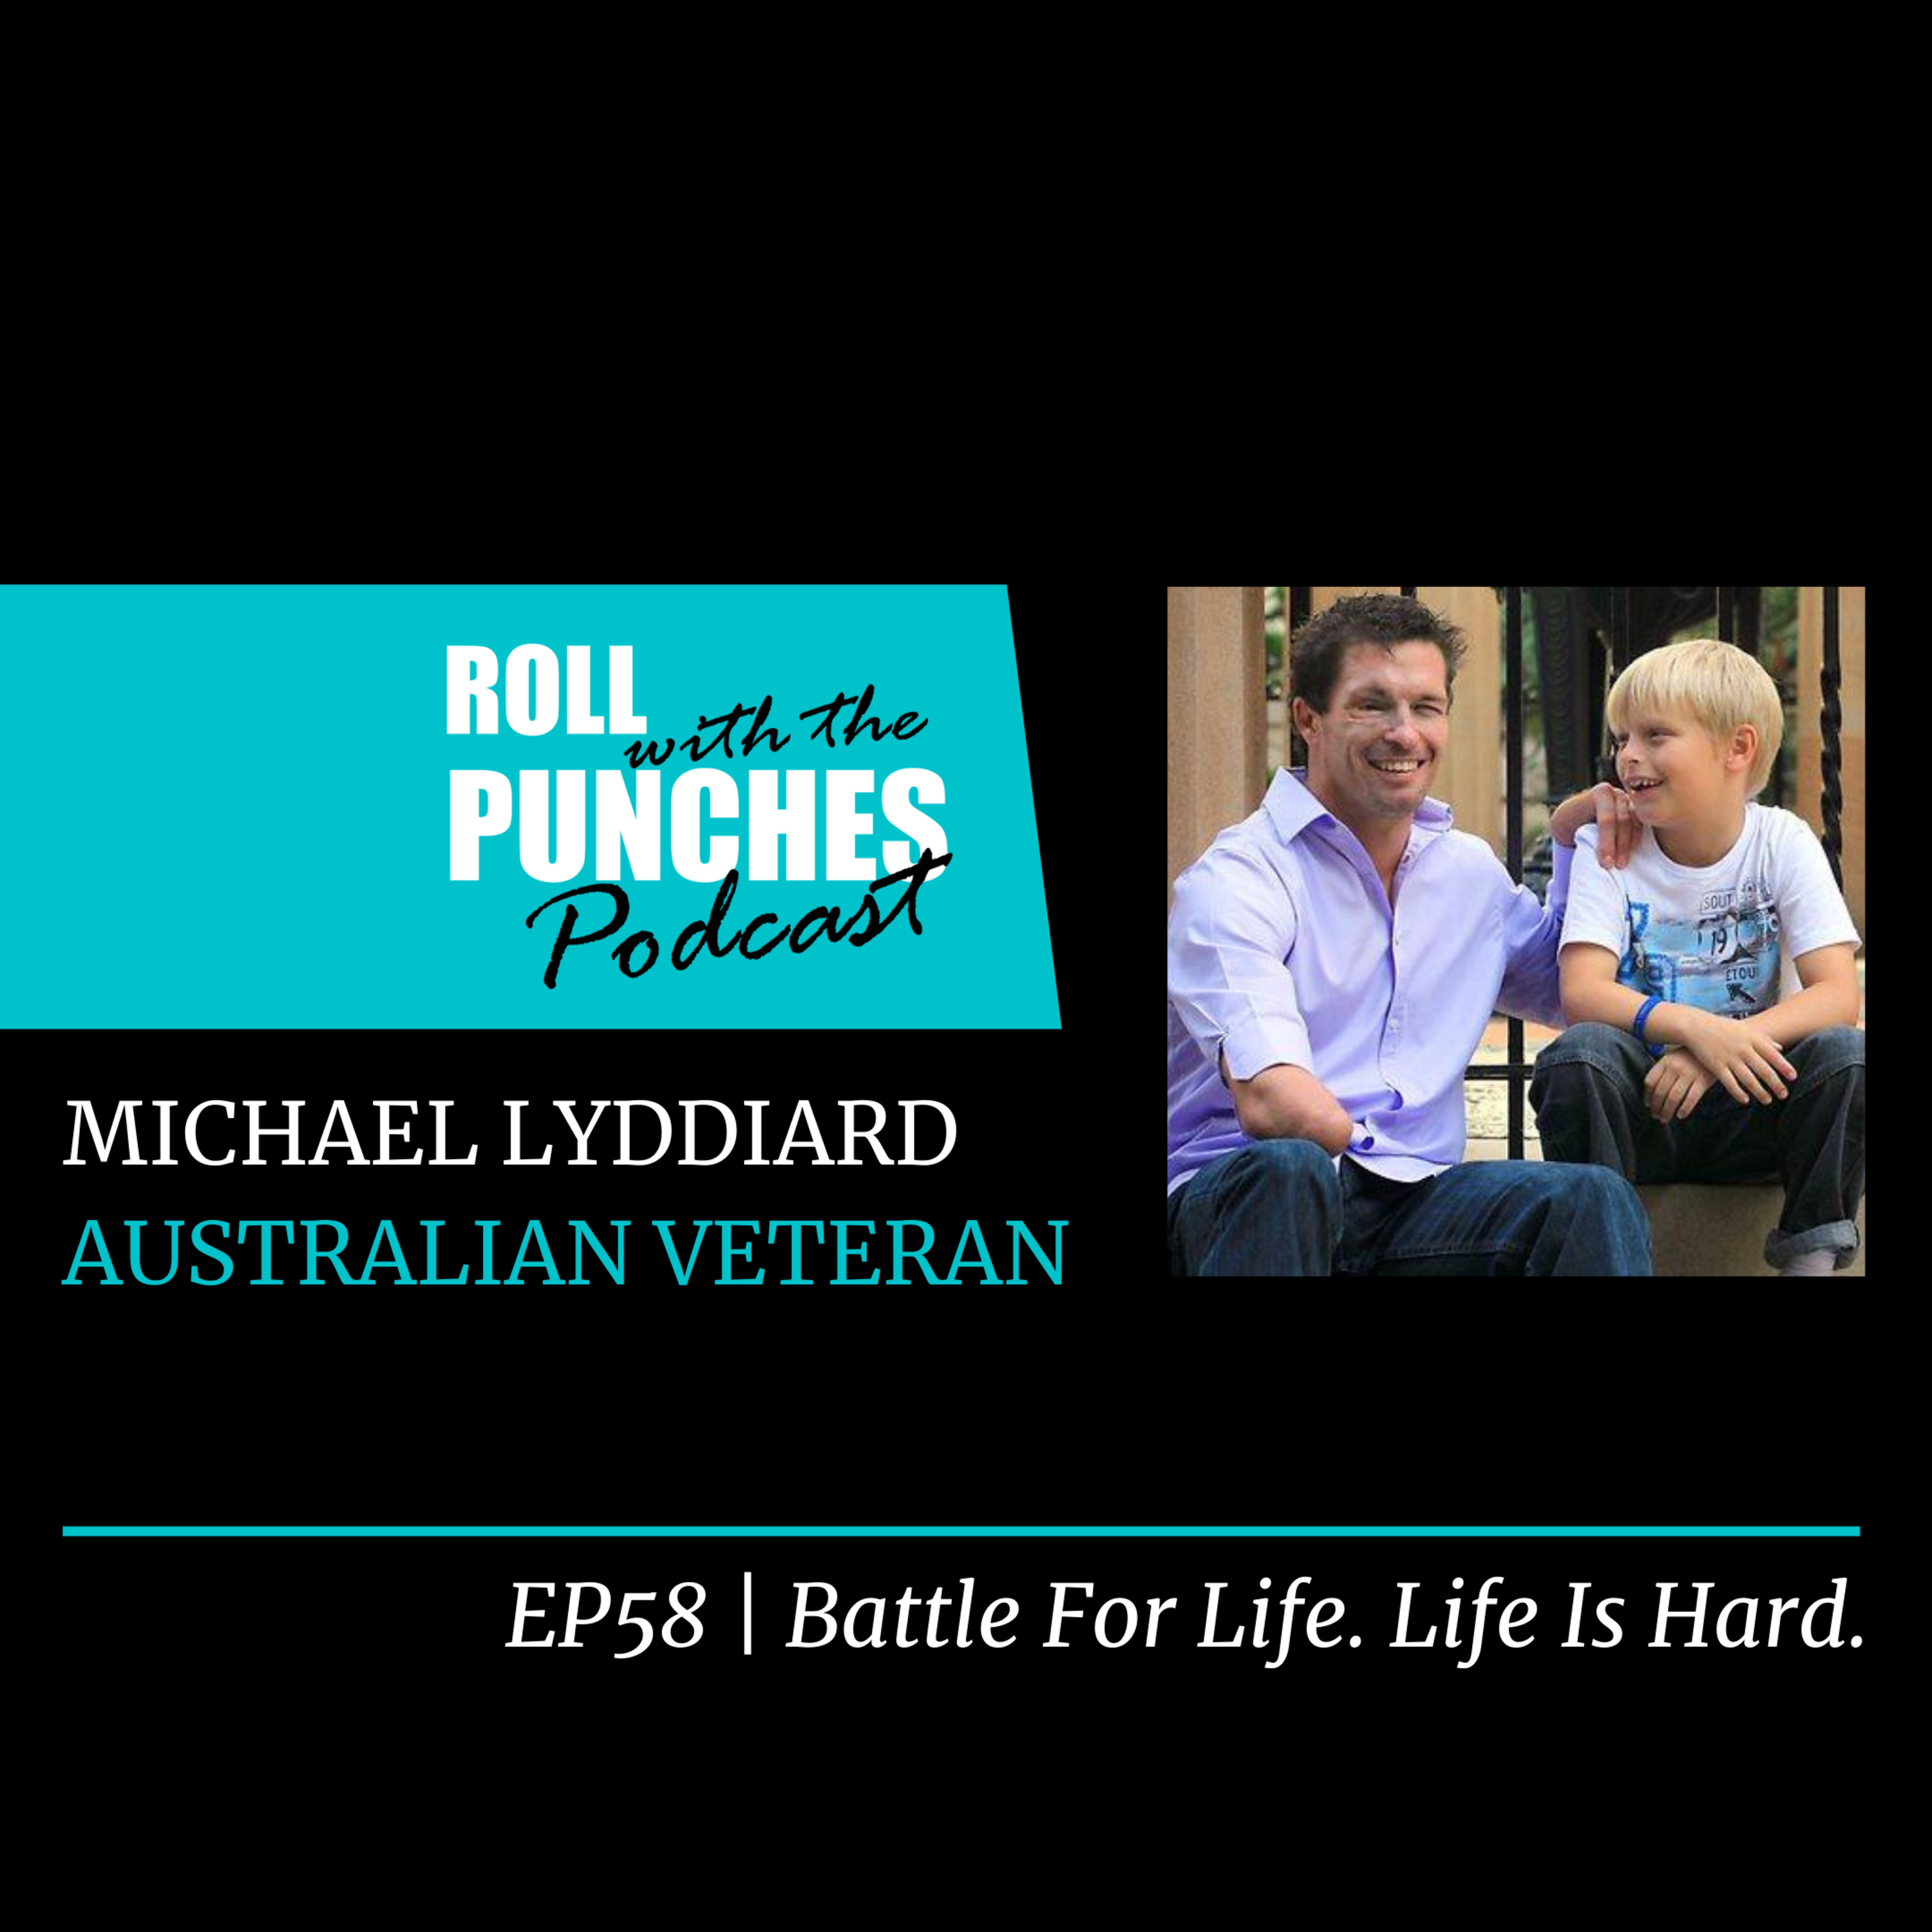 EP58 Battle For Life. Life Is Hard. | Michael Lyddiard